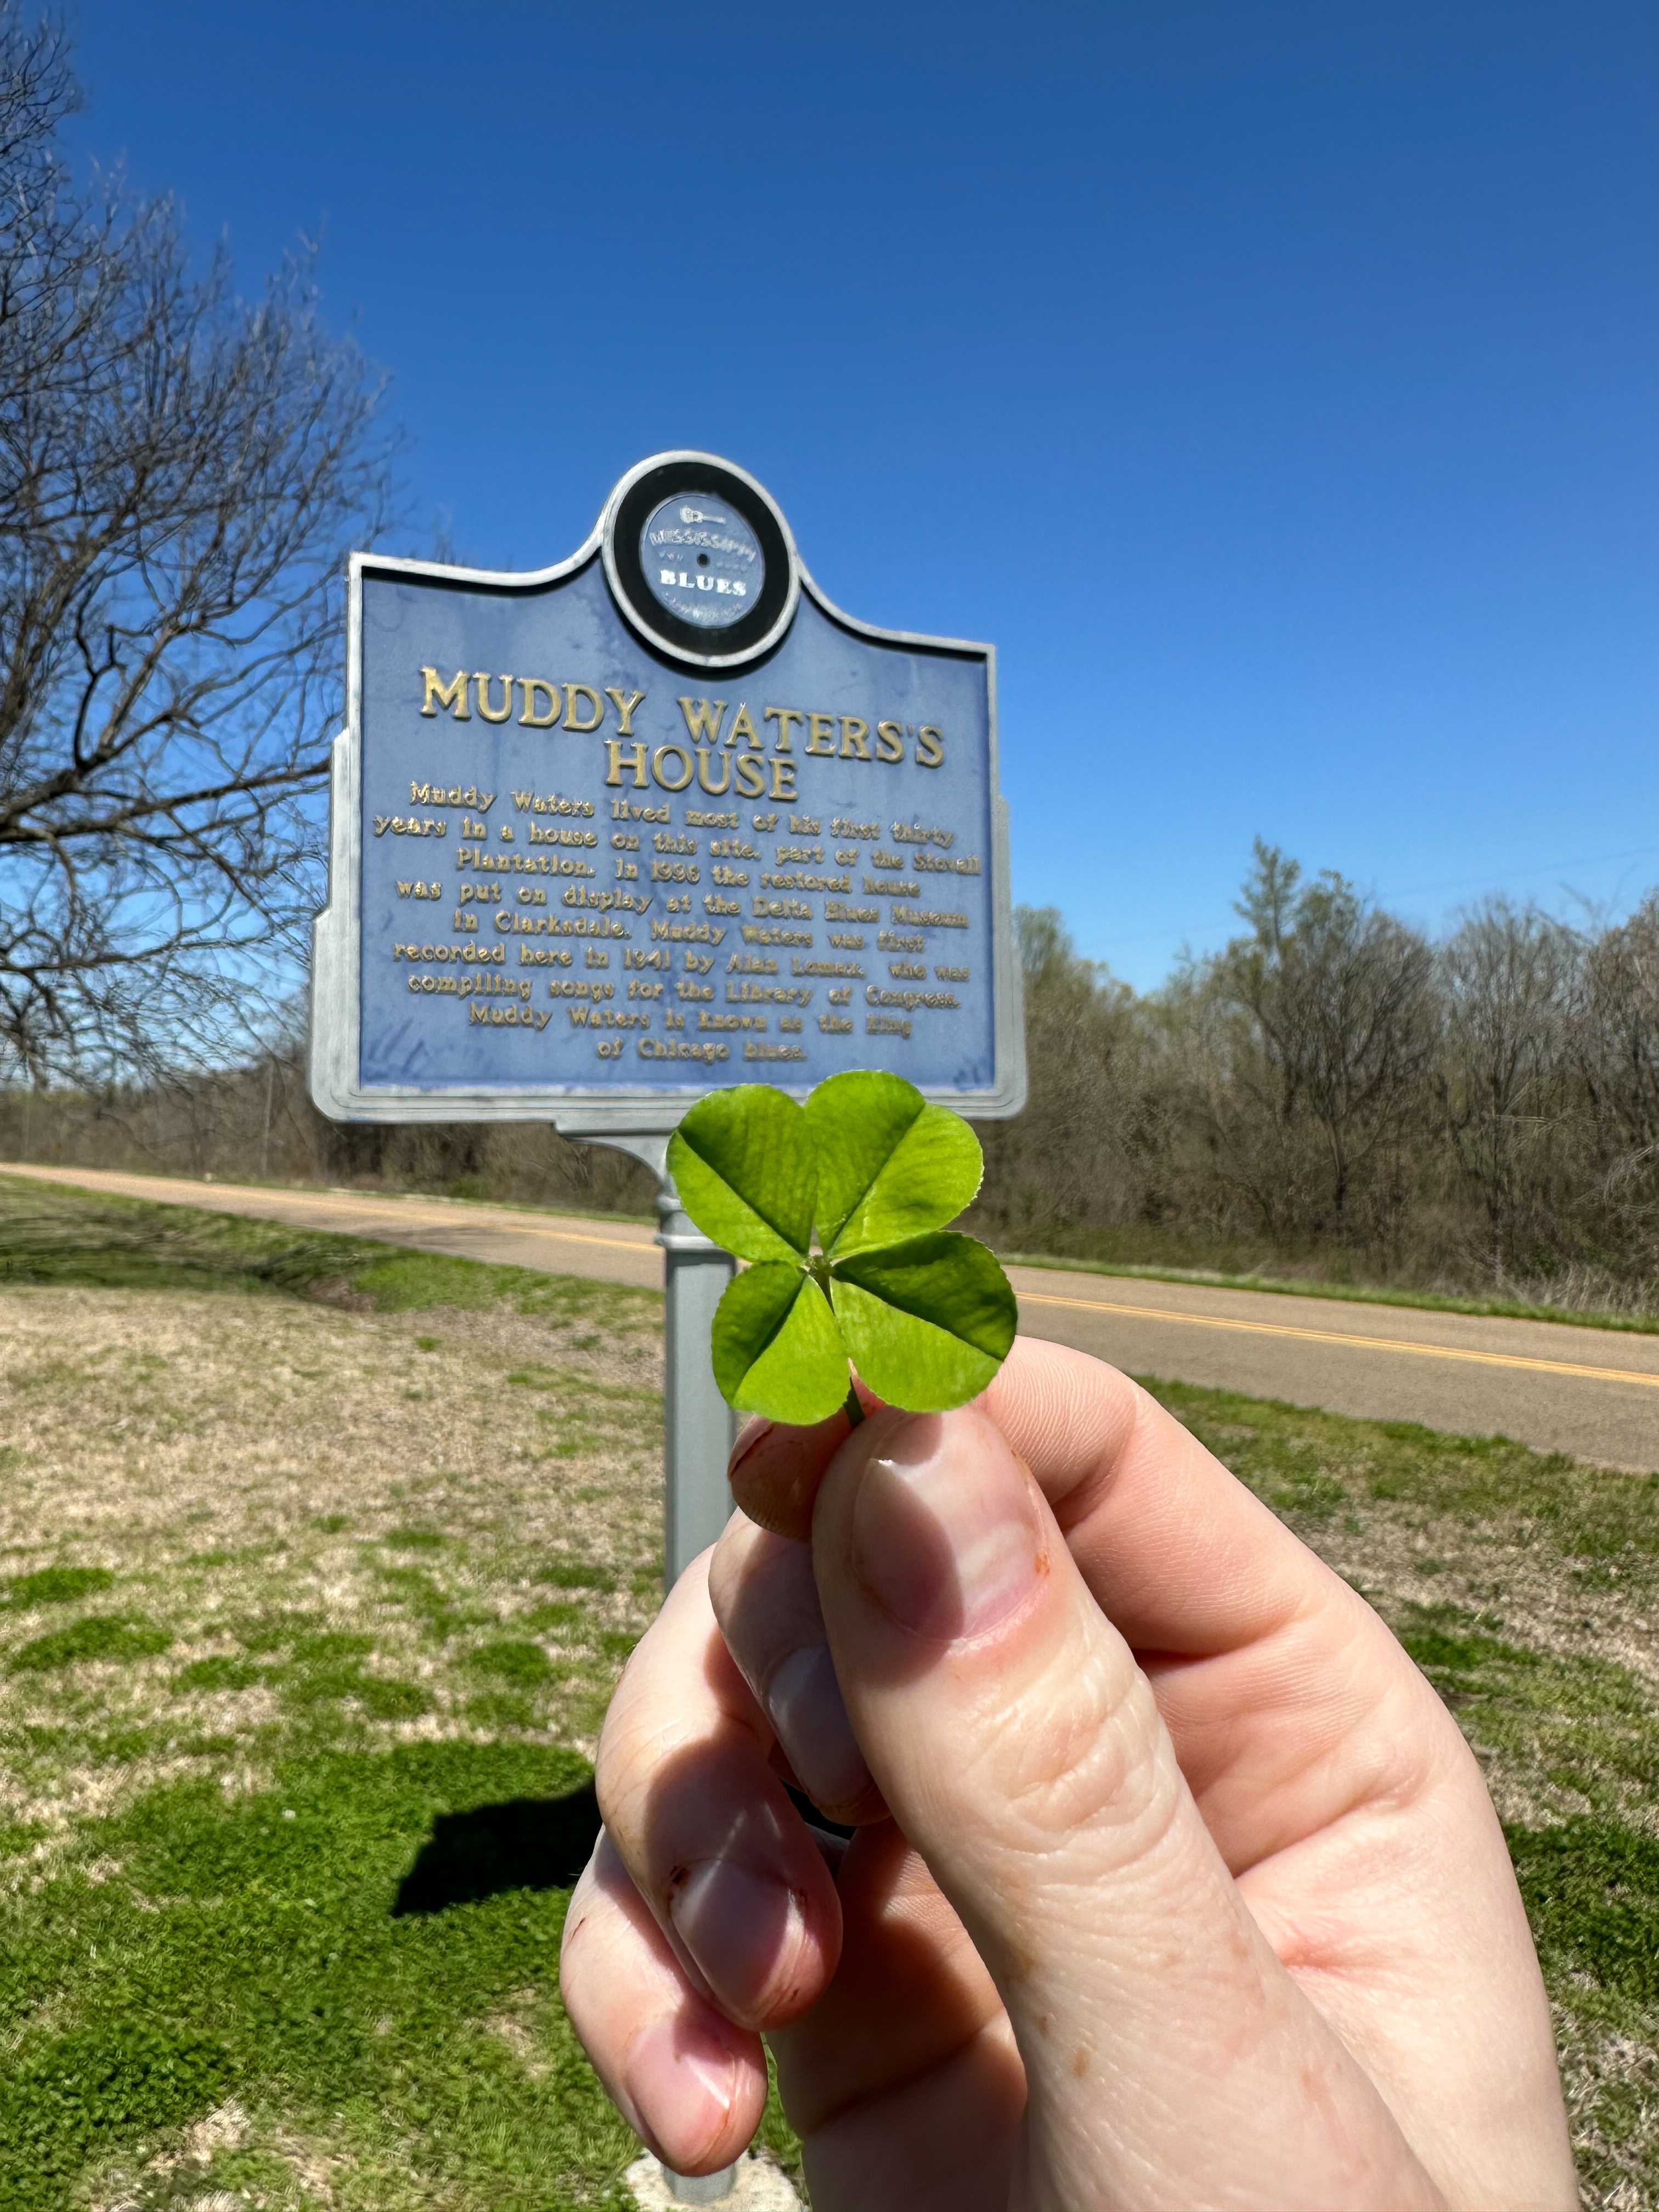 A photograph of a hand holding up a four-leaf clover in front of a historical marker that reads 'Muddy Waters's House' next to a country road